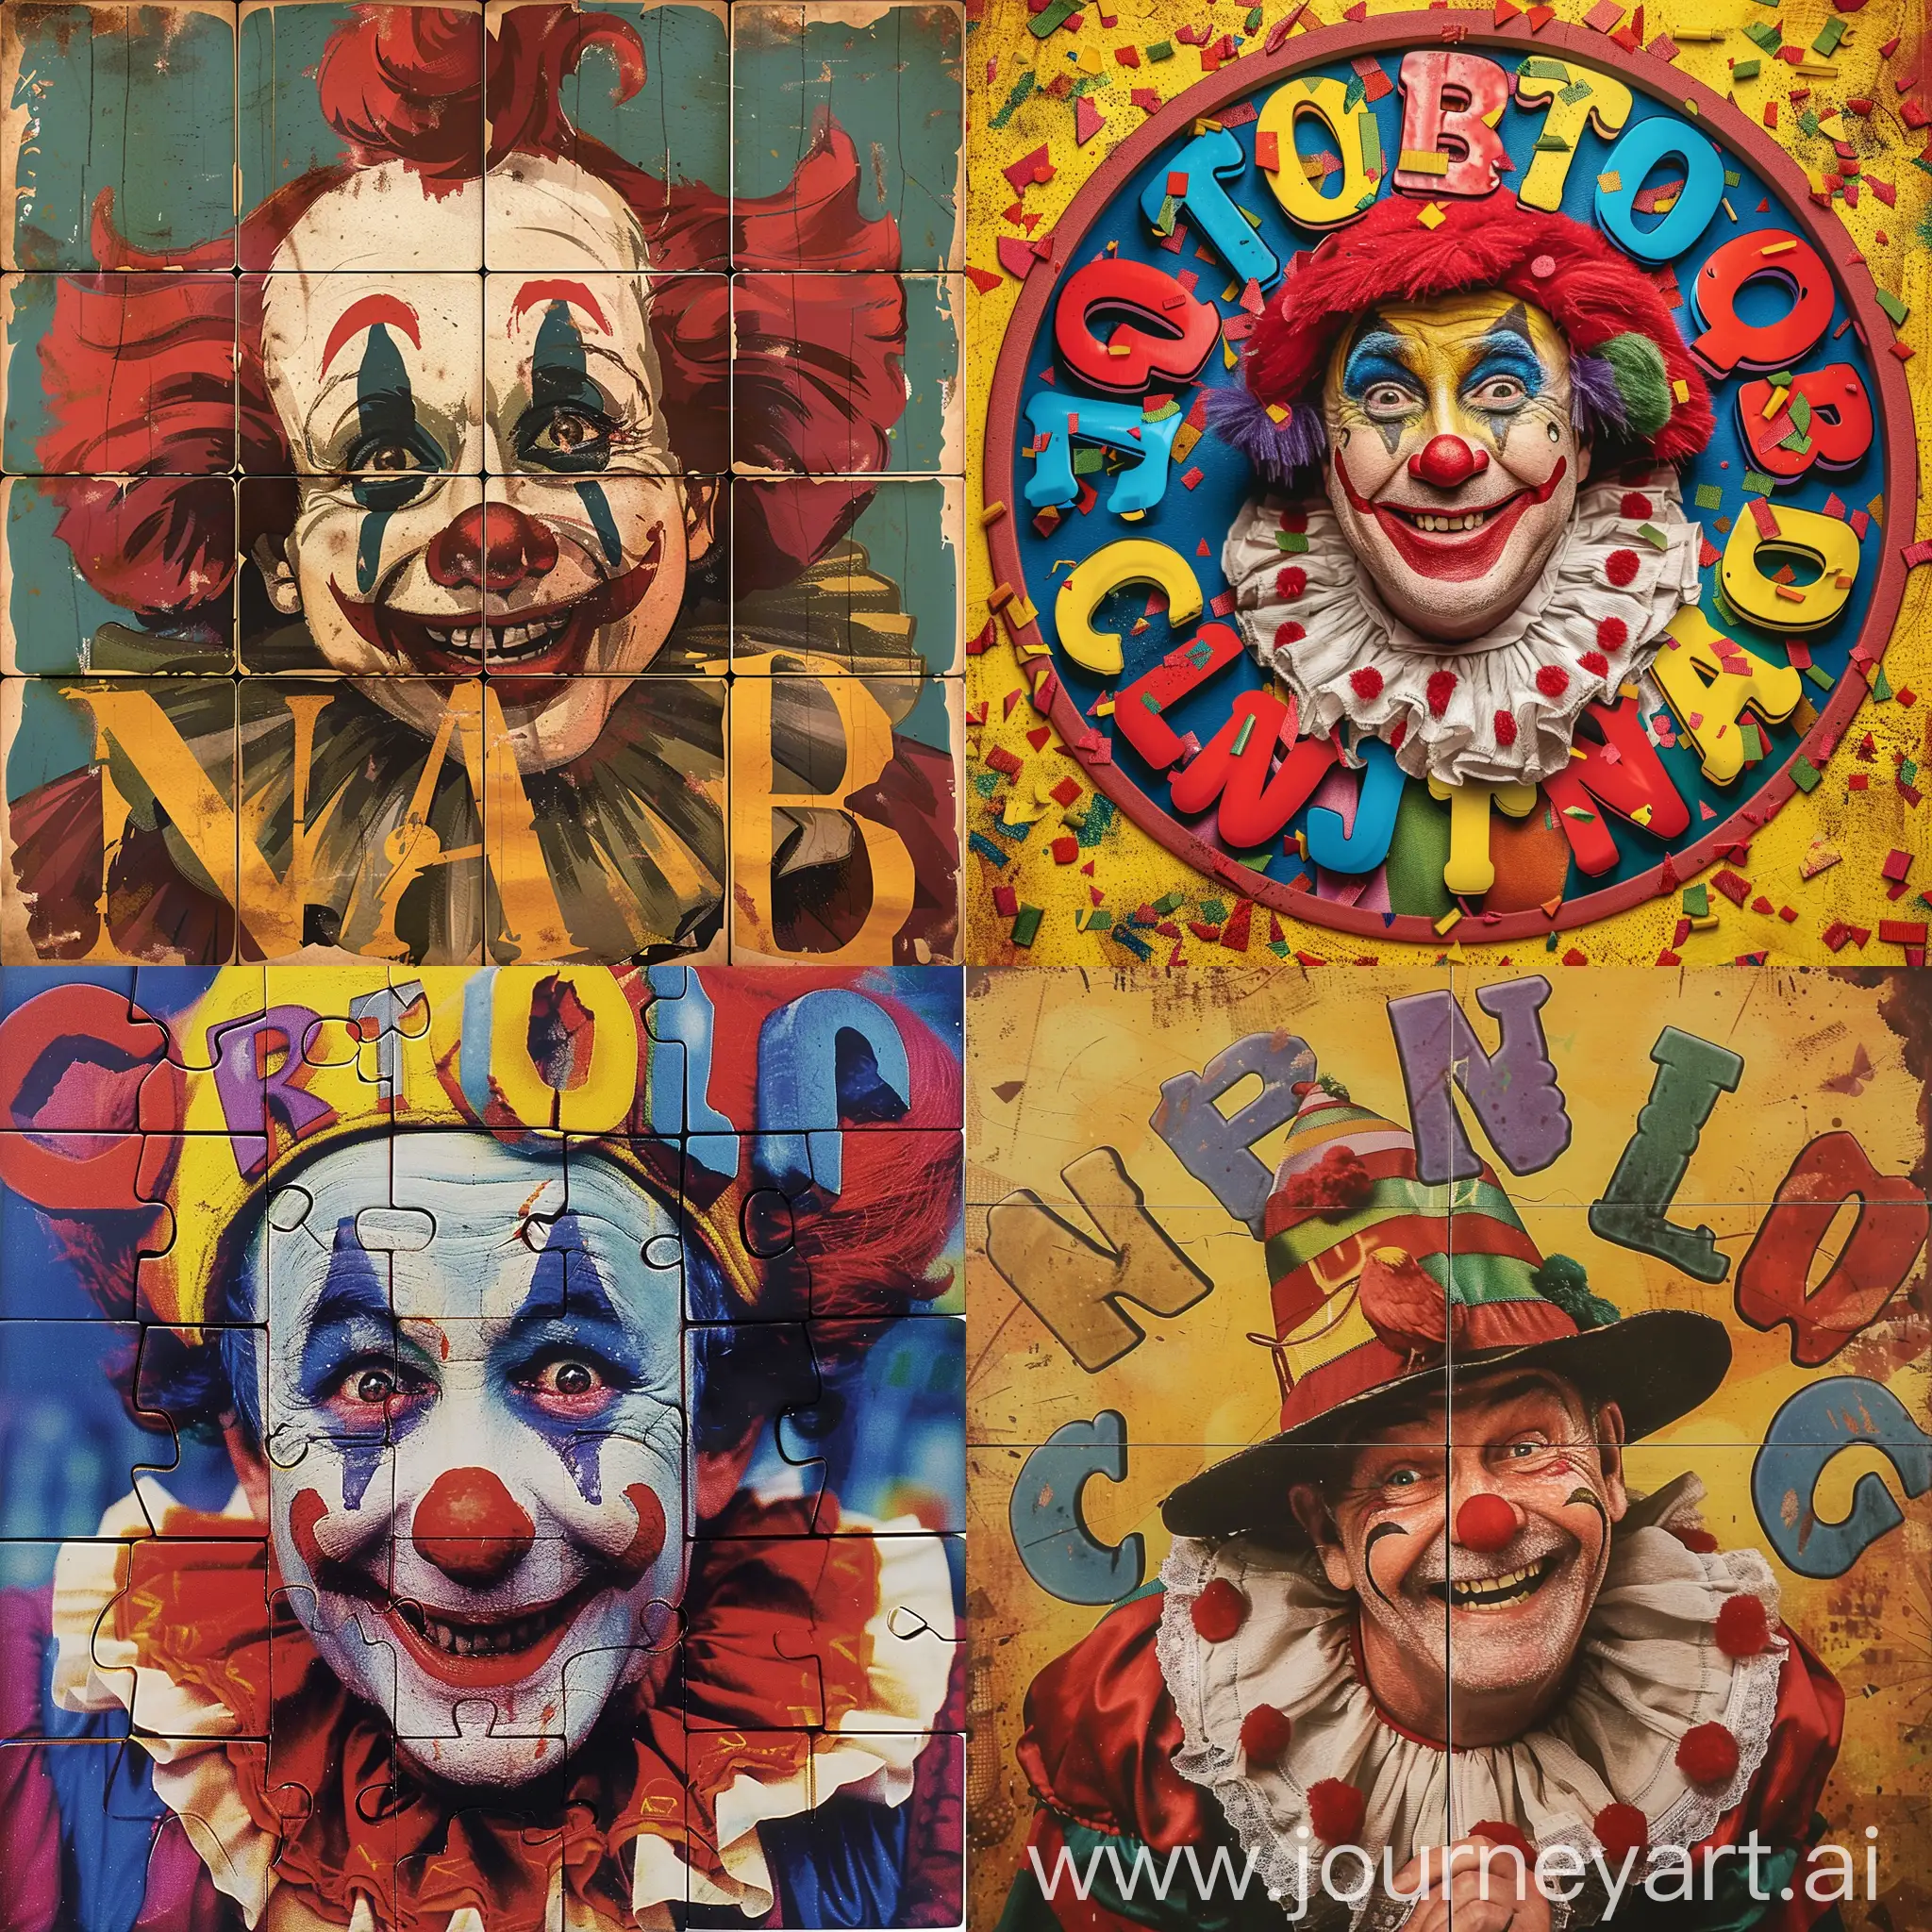 Create a fun atmosphere with the perfect interlocking picture of clown letters on the back No dust ,addition to your circus-themed home decor, ideal for birthday parties and unique gifts for men, women, and seniors alike.